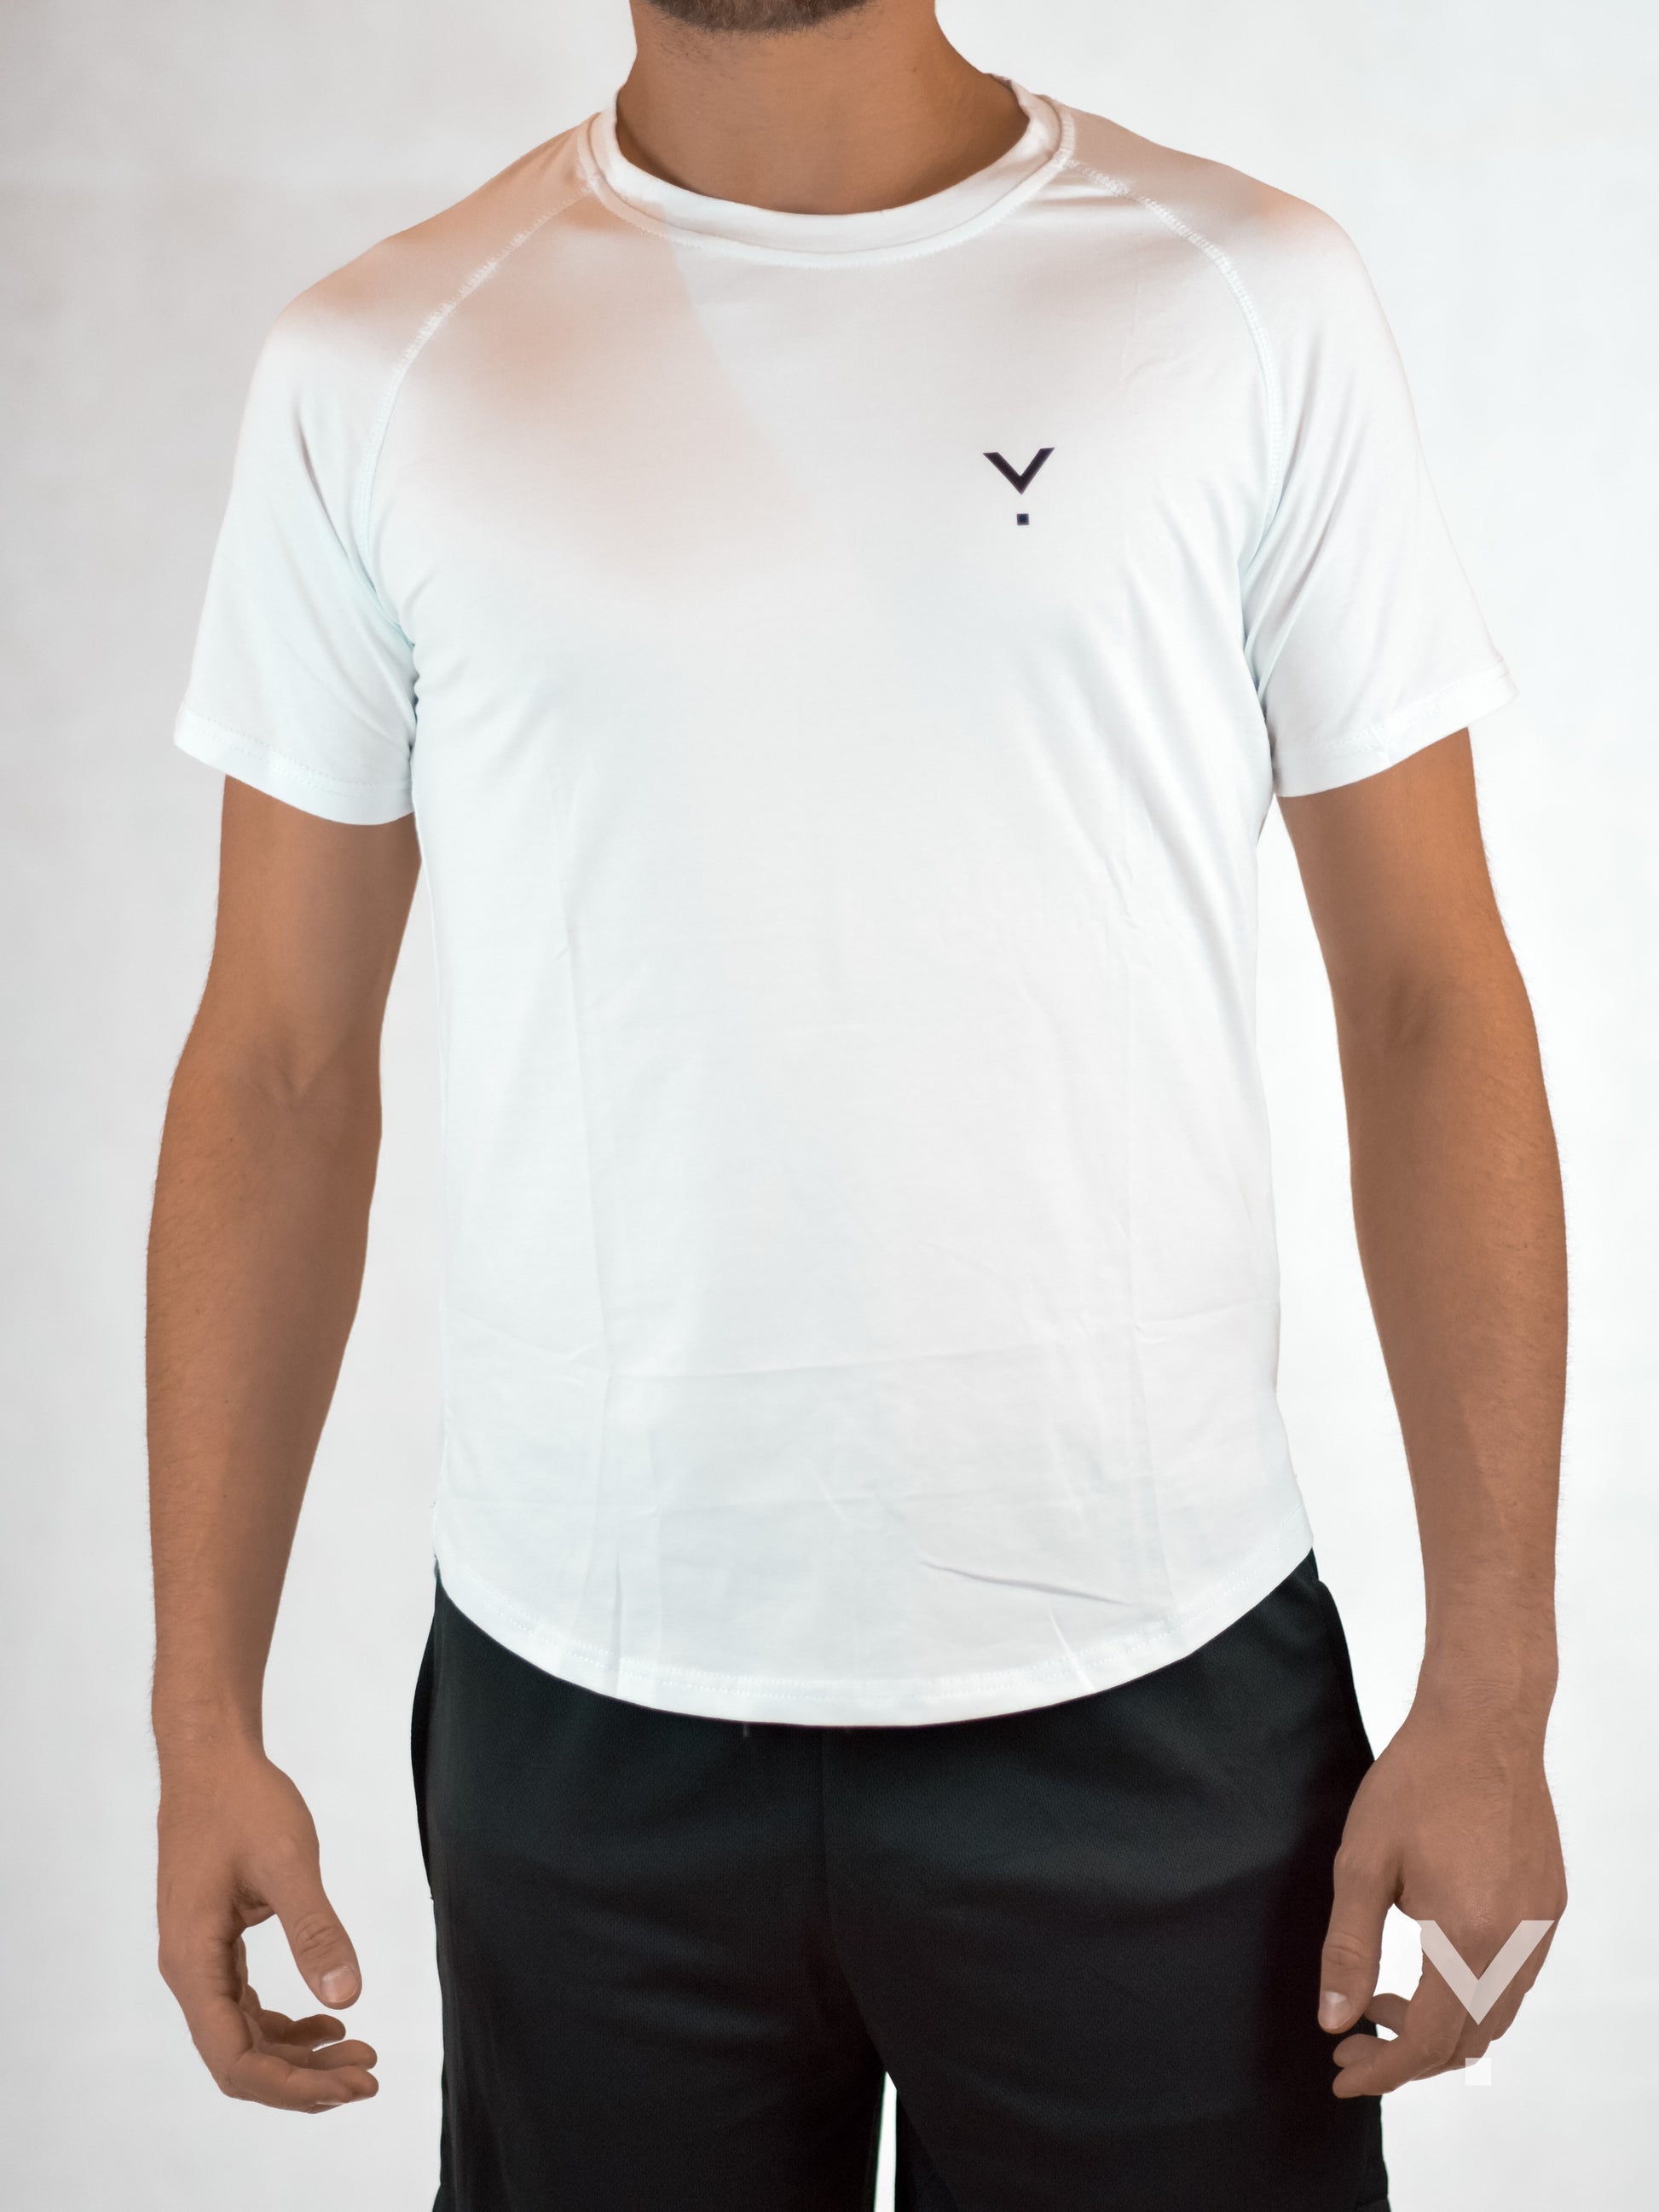 Section T-Shirt White - Mens T-shirts | AVAYOS